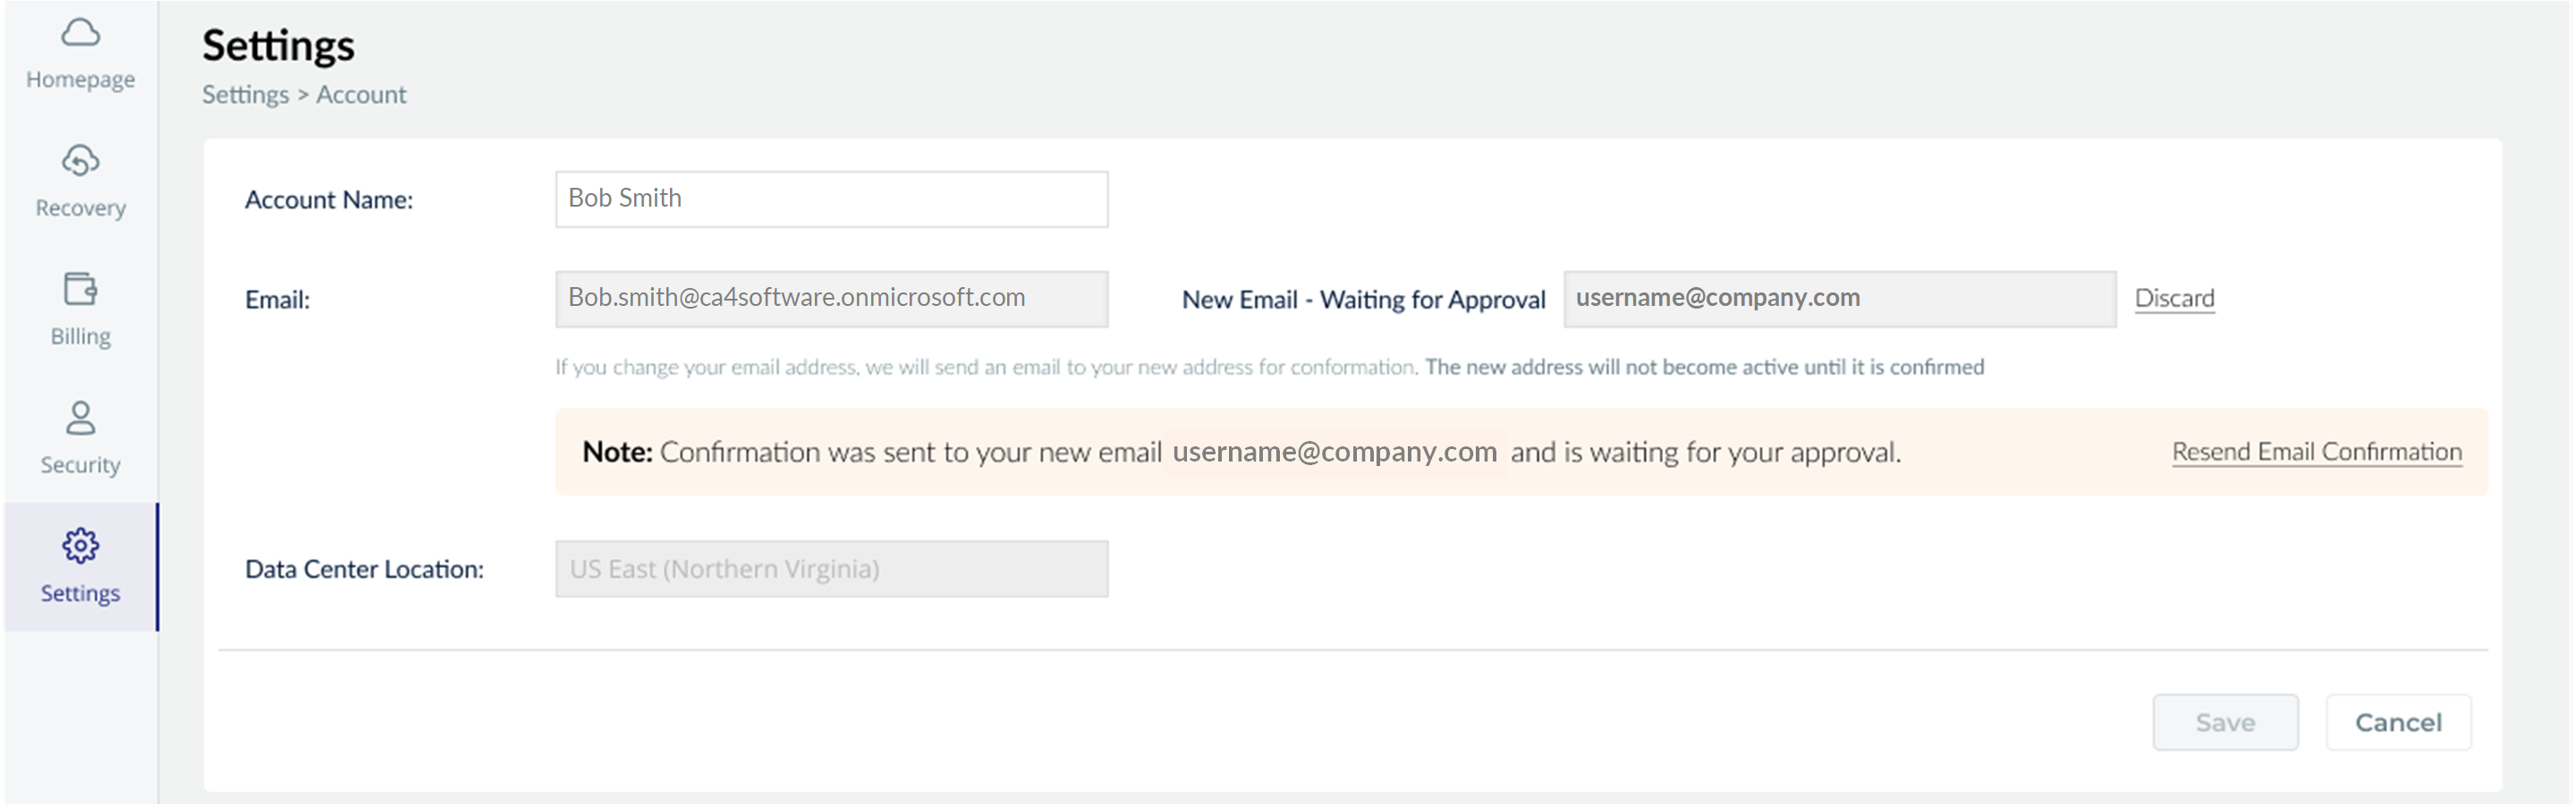 Account settings - message about confirmation waiting for your approval